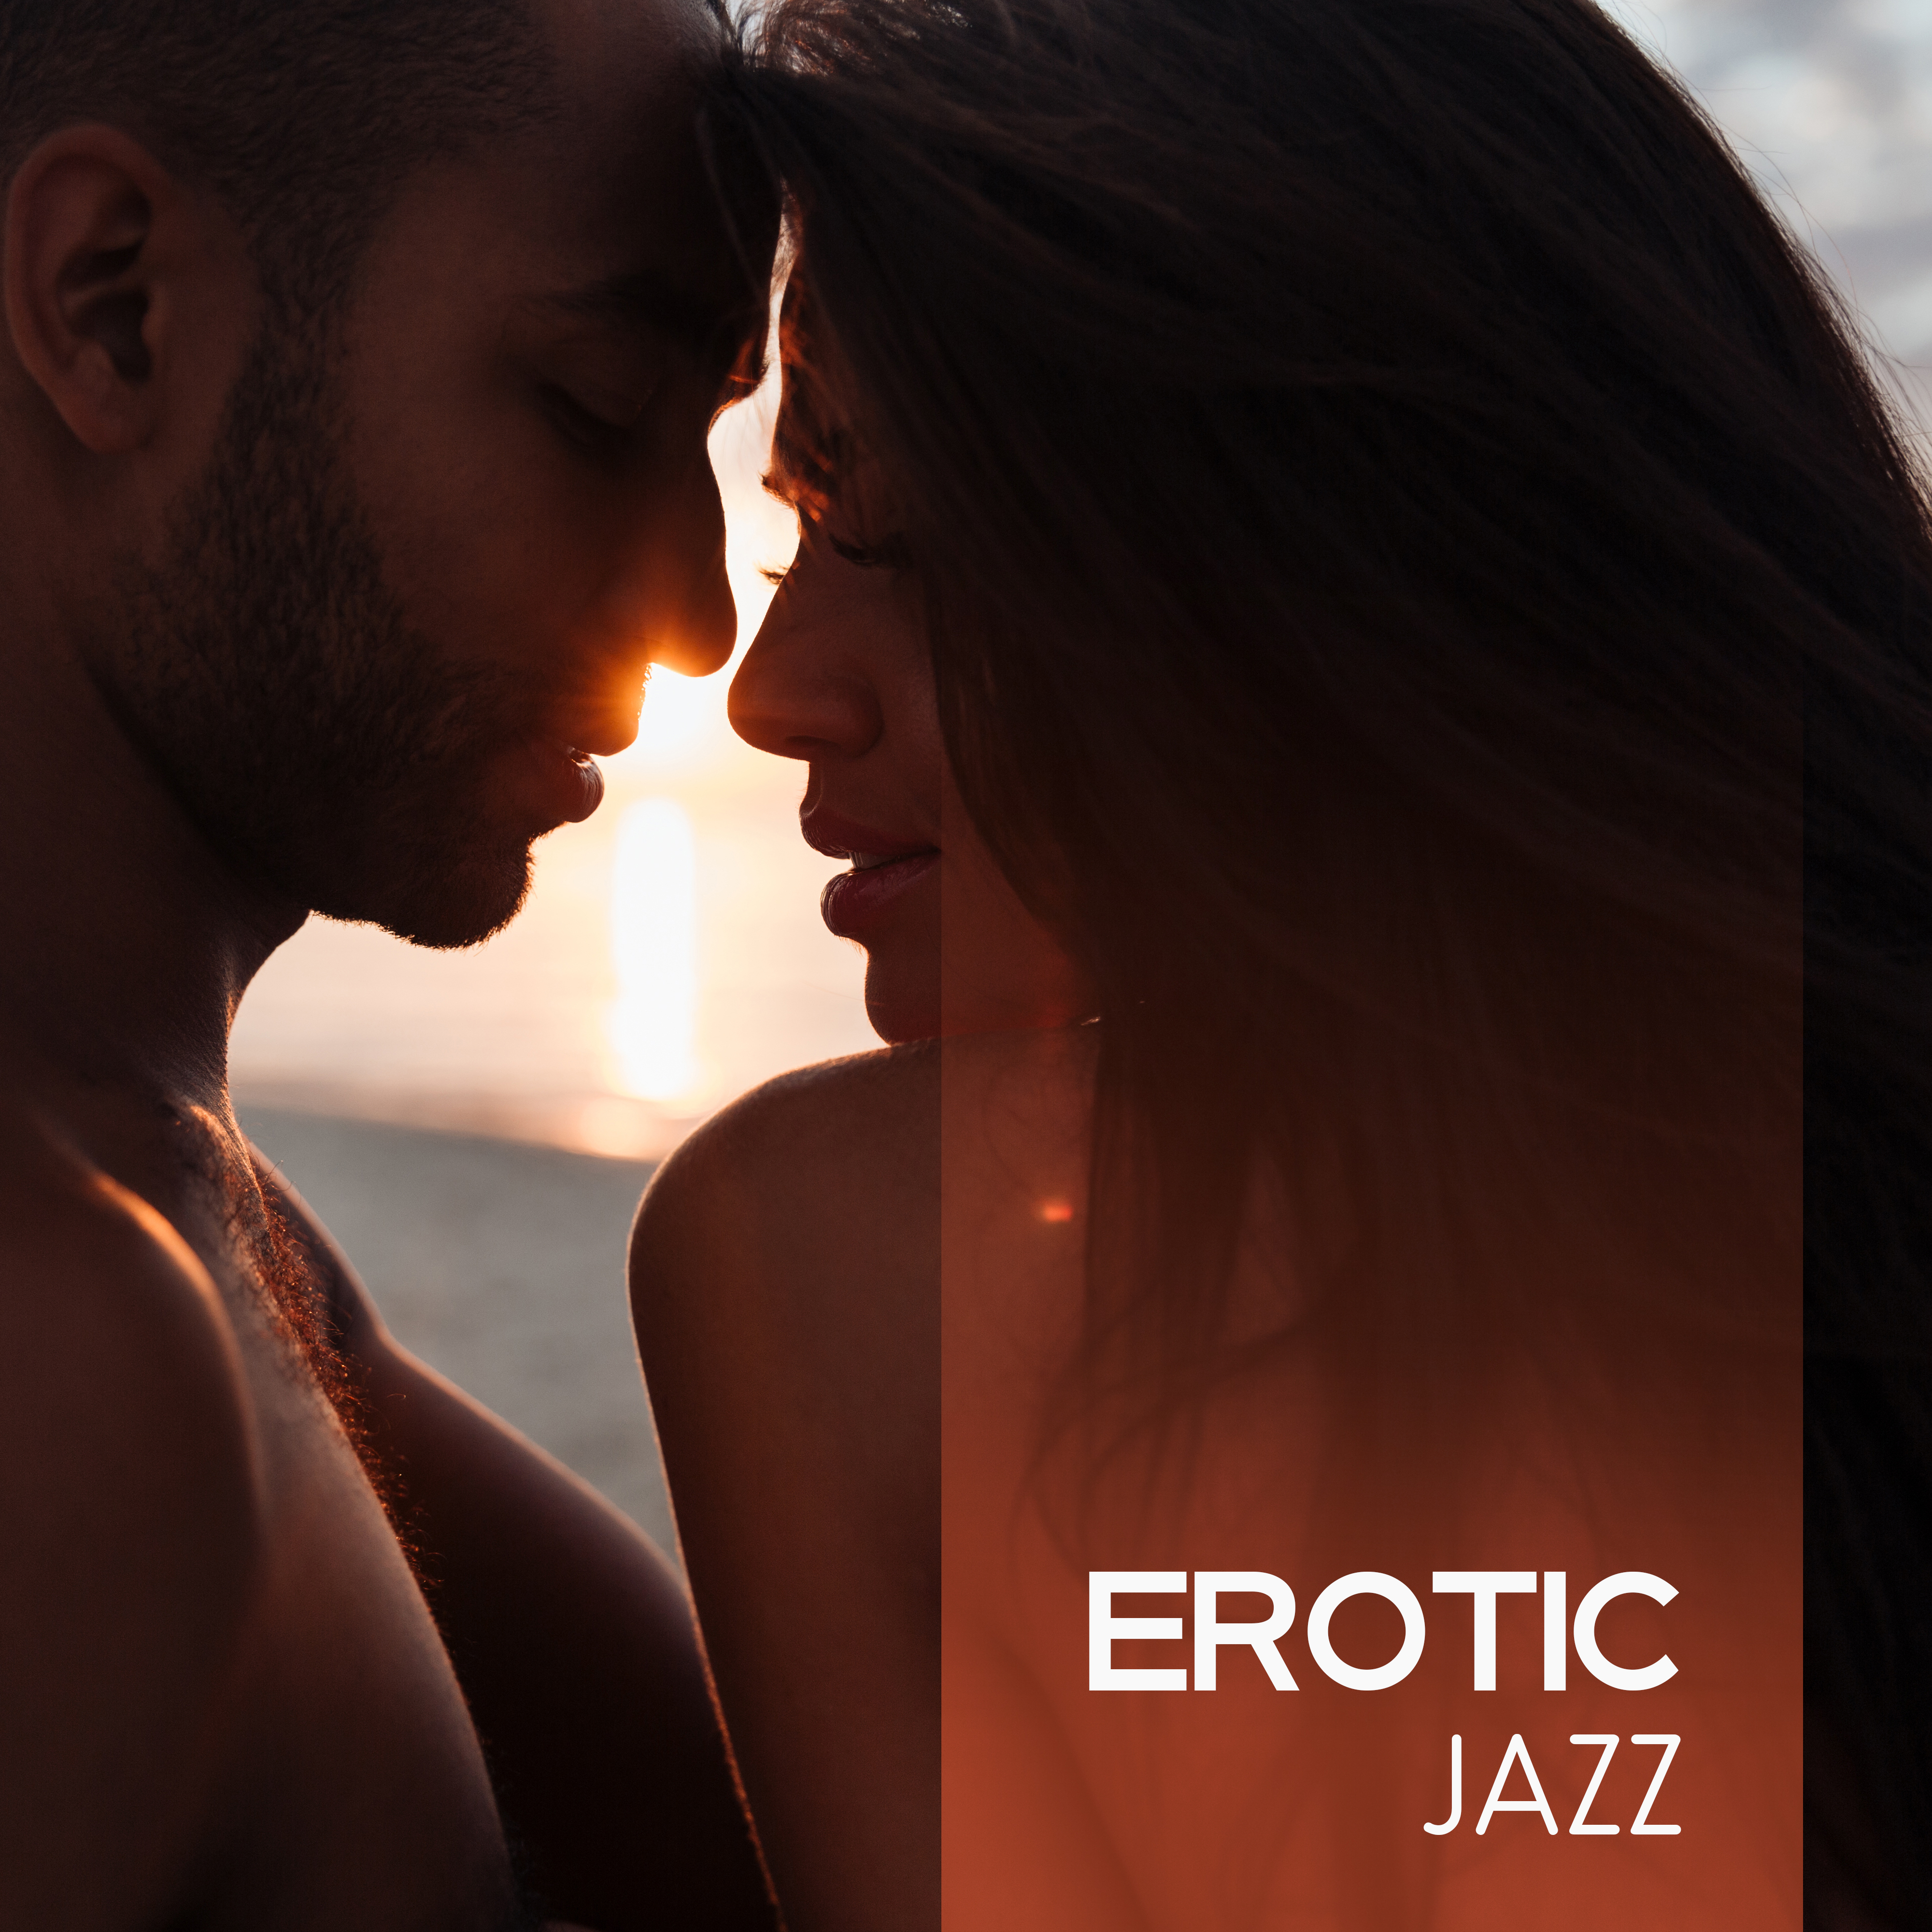 Erotic Jazz  Sensual Music, Pure Relaxation for Two, Hot Massage, Erotic Dance, Sensual Saxophone, True Love,  Dance, Smooth Jazz